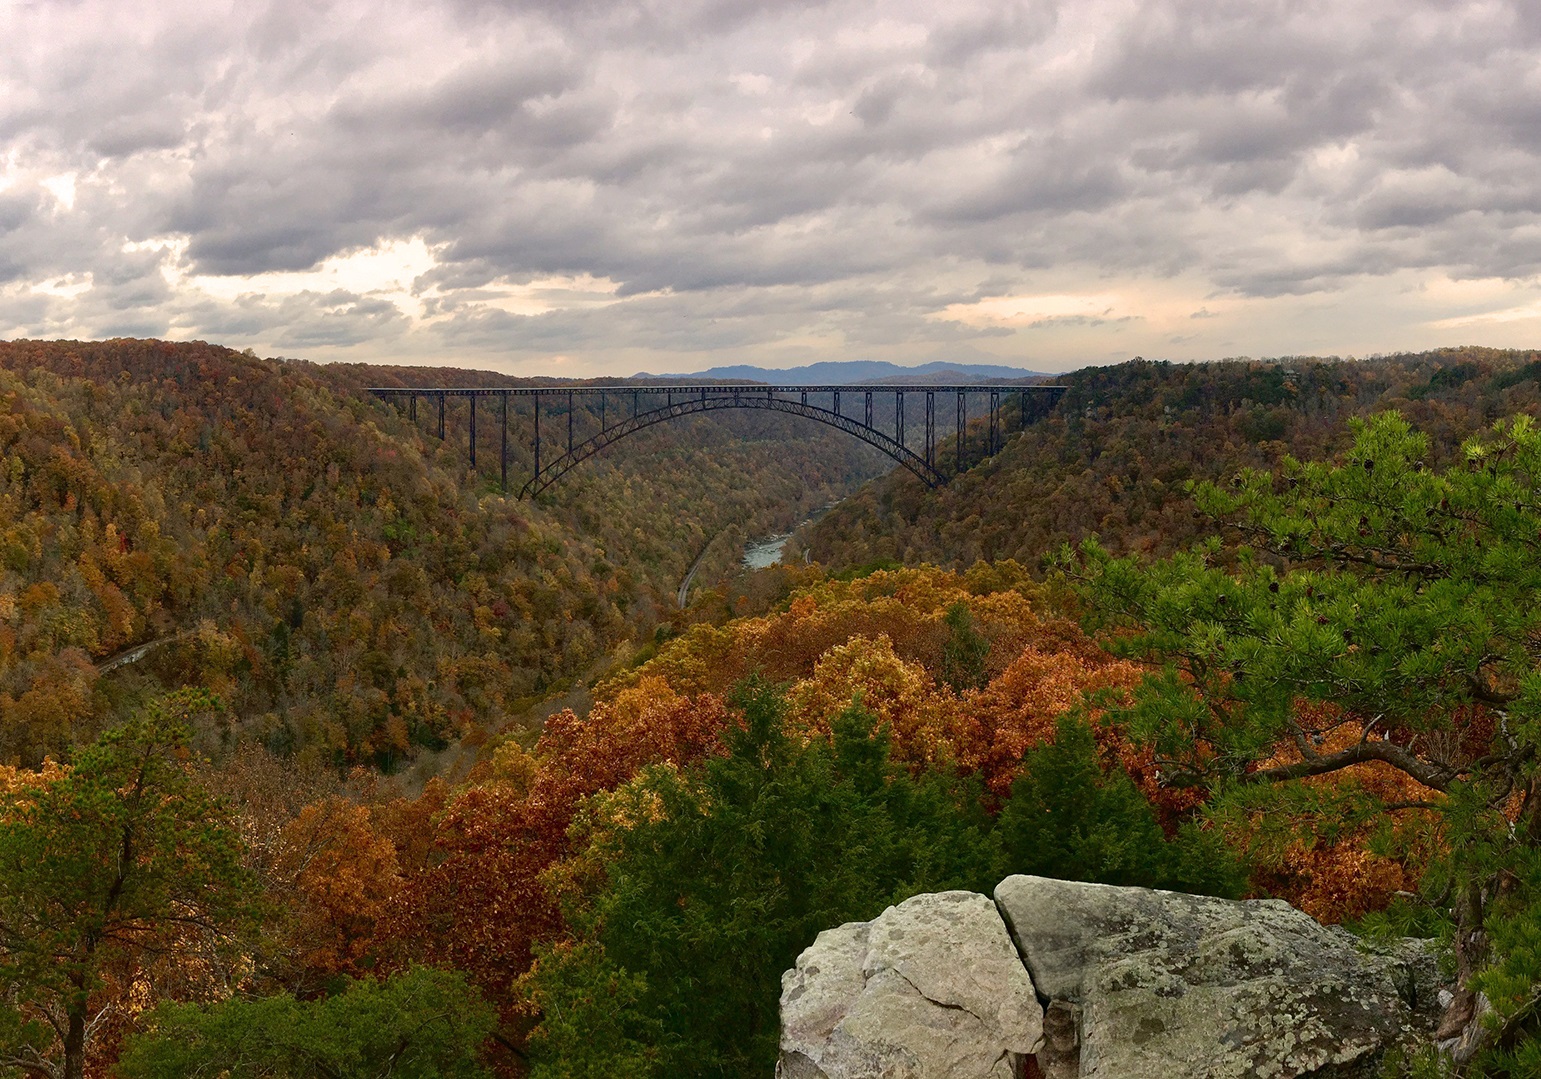 Autumn view of the New River Gorge Bridge from the Long Point Trail.